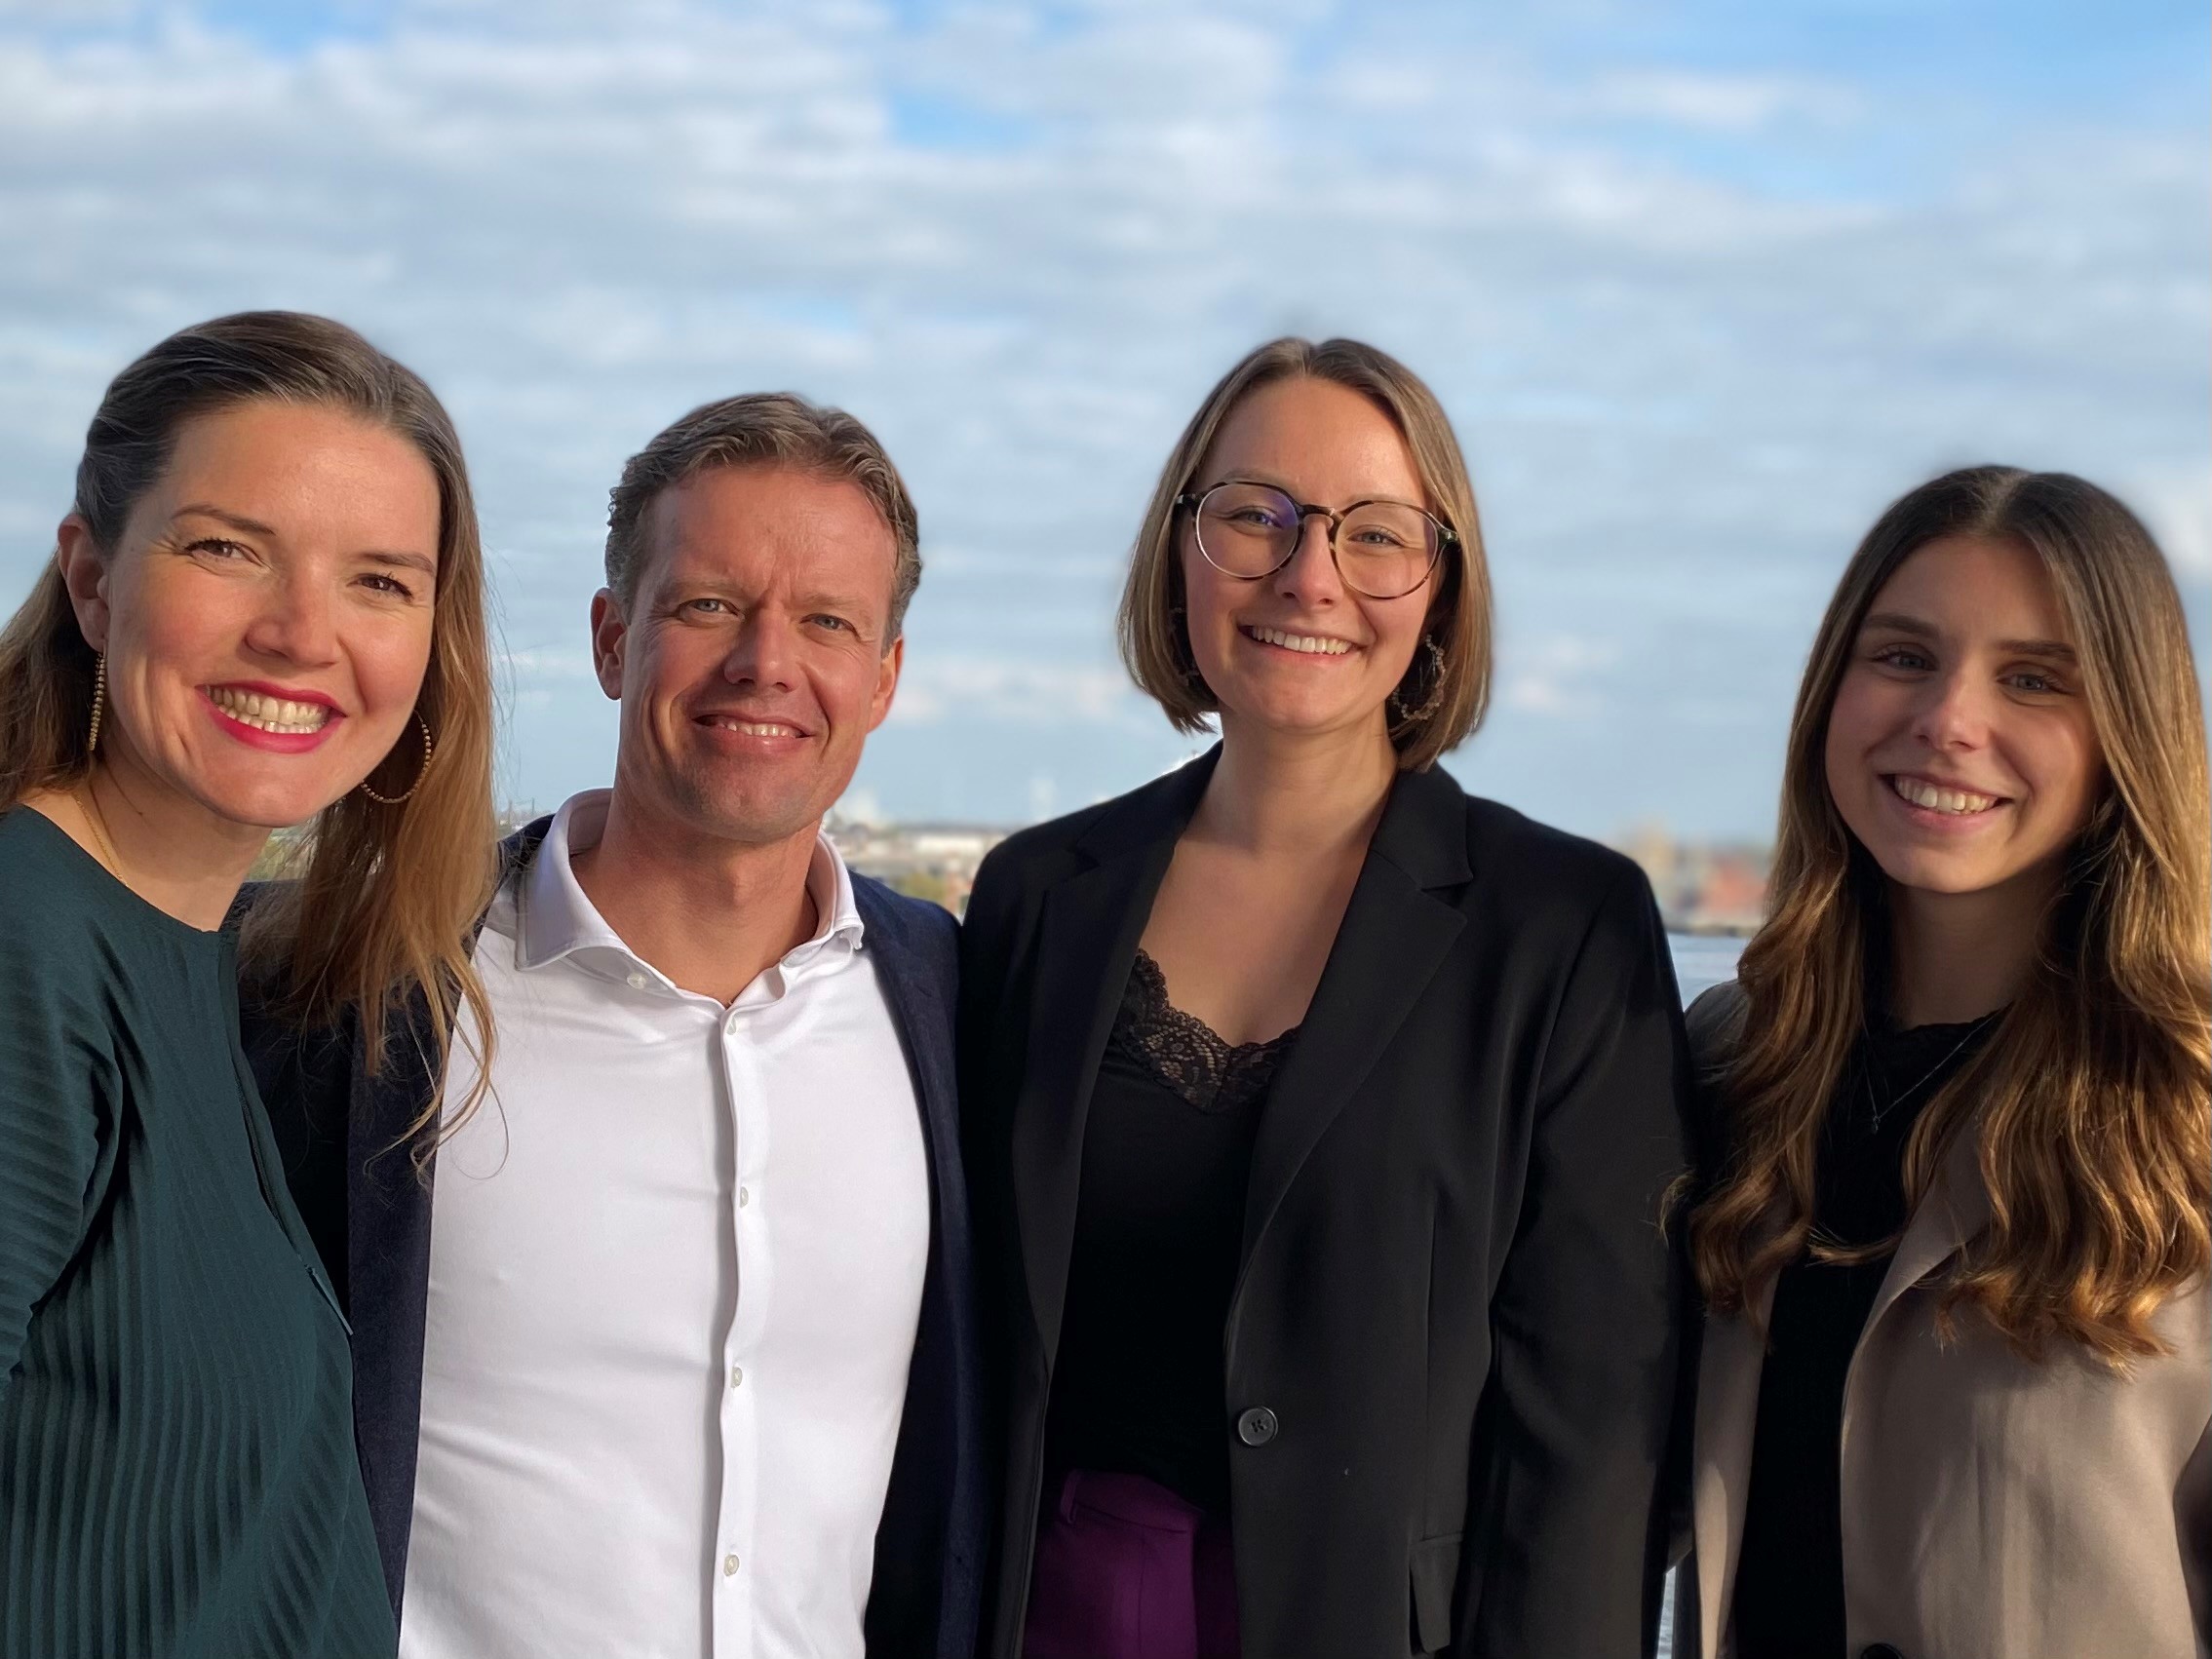 A photo shows the team from the EOS finlit foundation: Jana Titov, Sebastian Richter, Marie Langeloh and Leonie Schoch (from left to right).